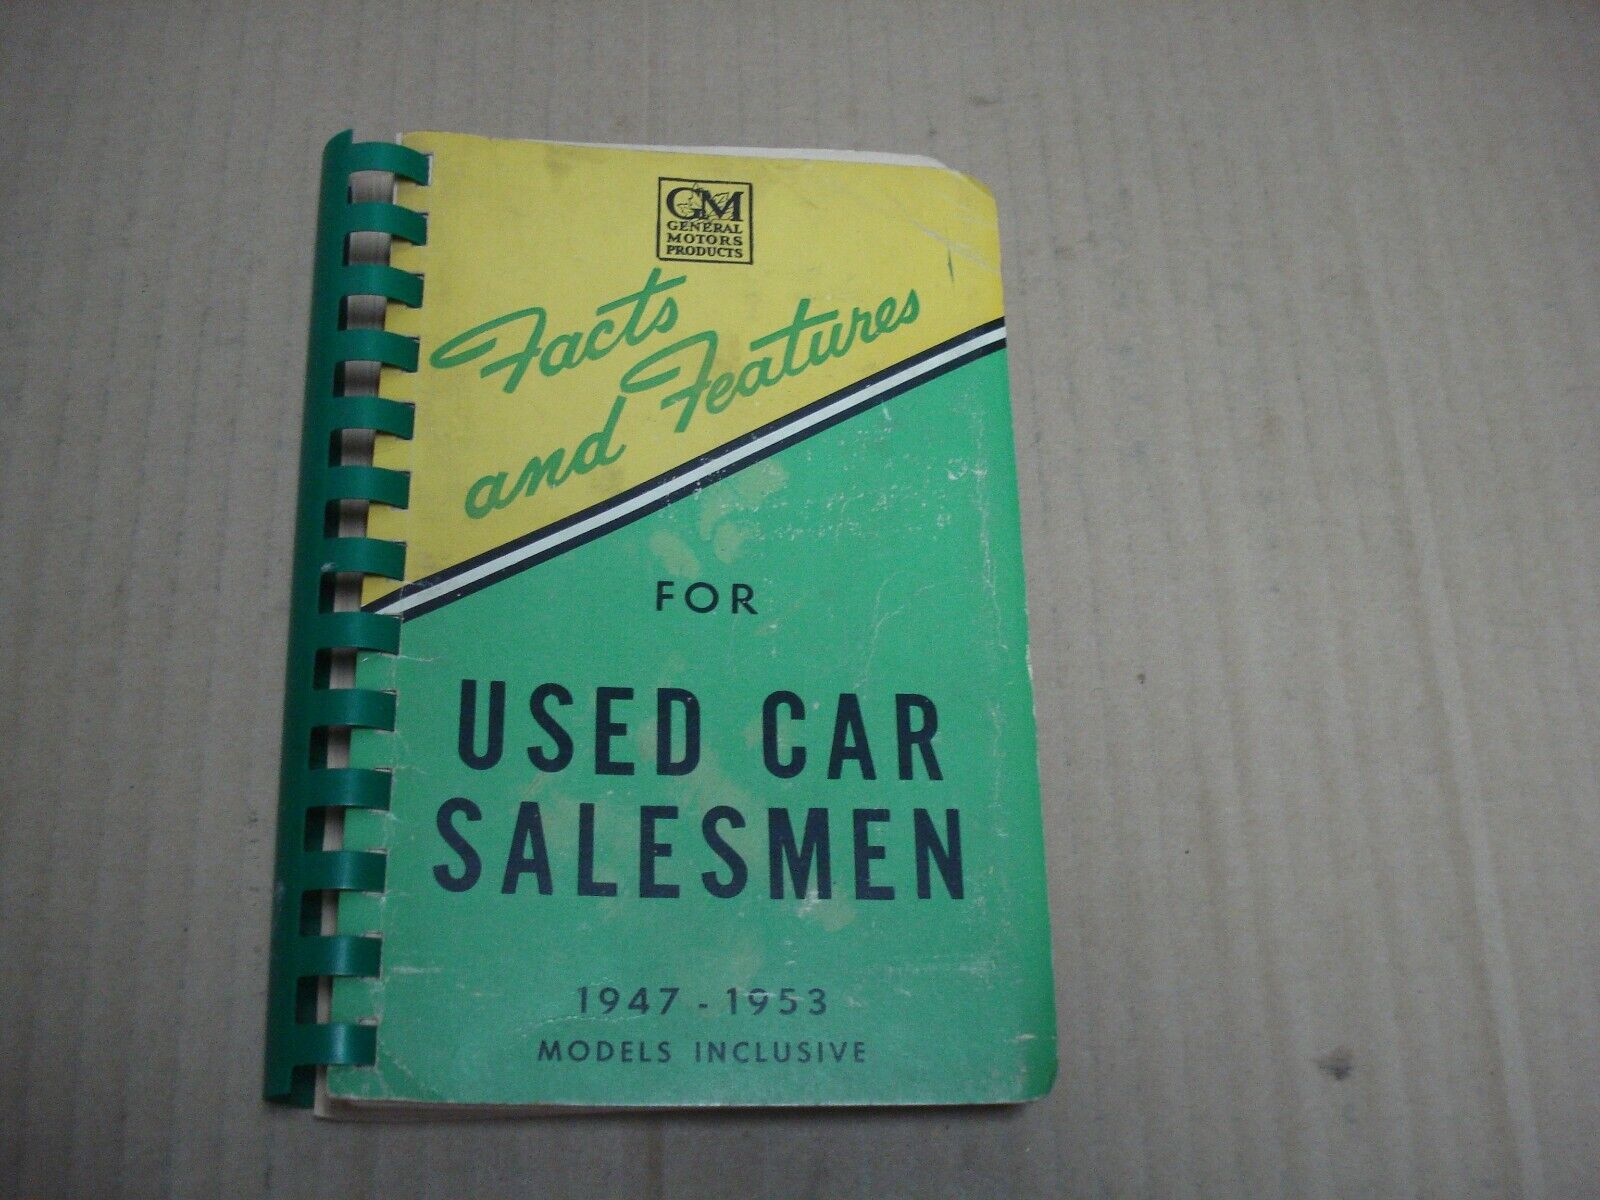 GM Canada Facts and Features for Used Car Salesmen 1947-1953 Models Inclusive